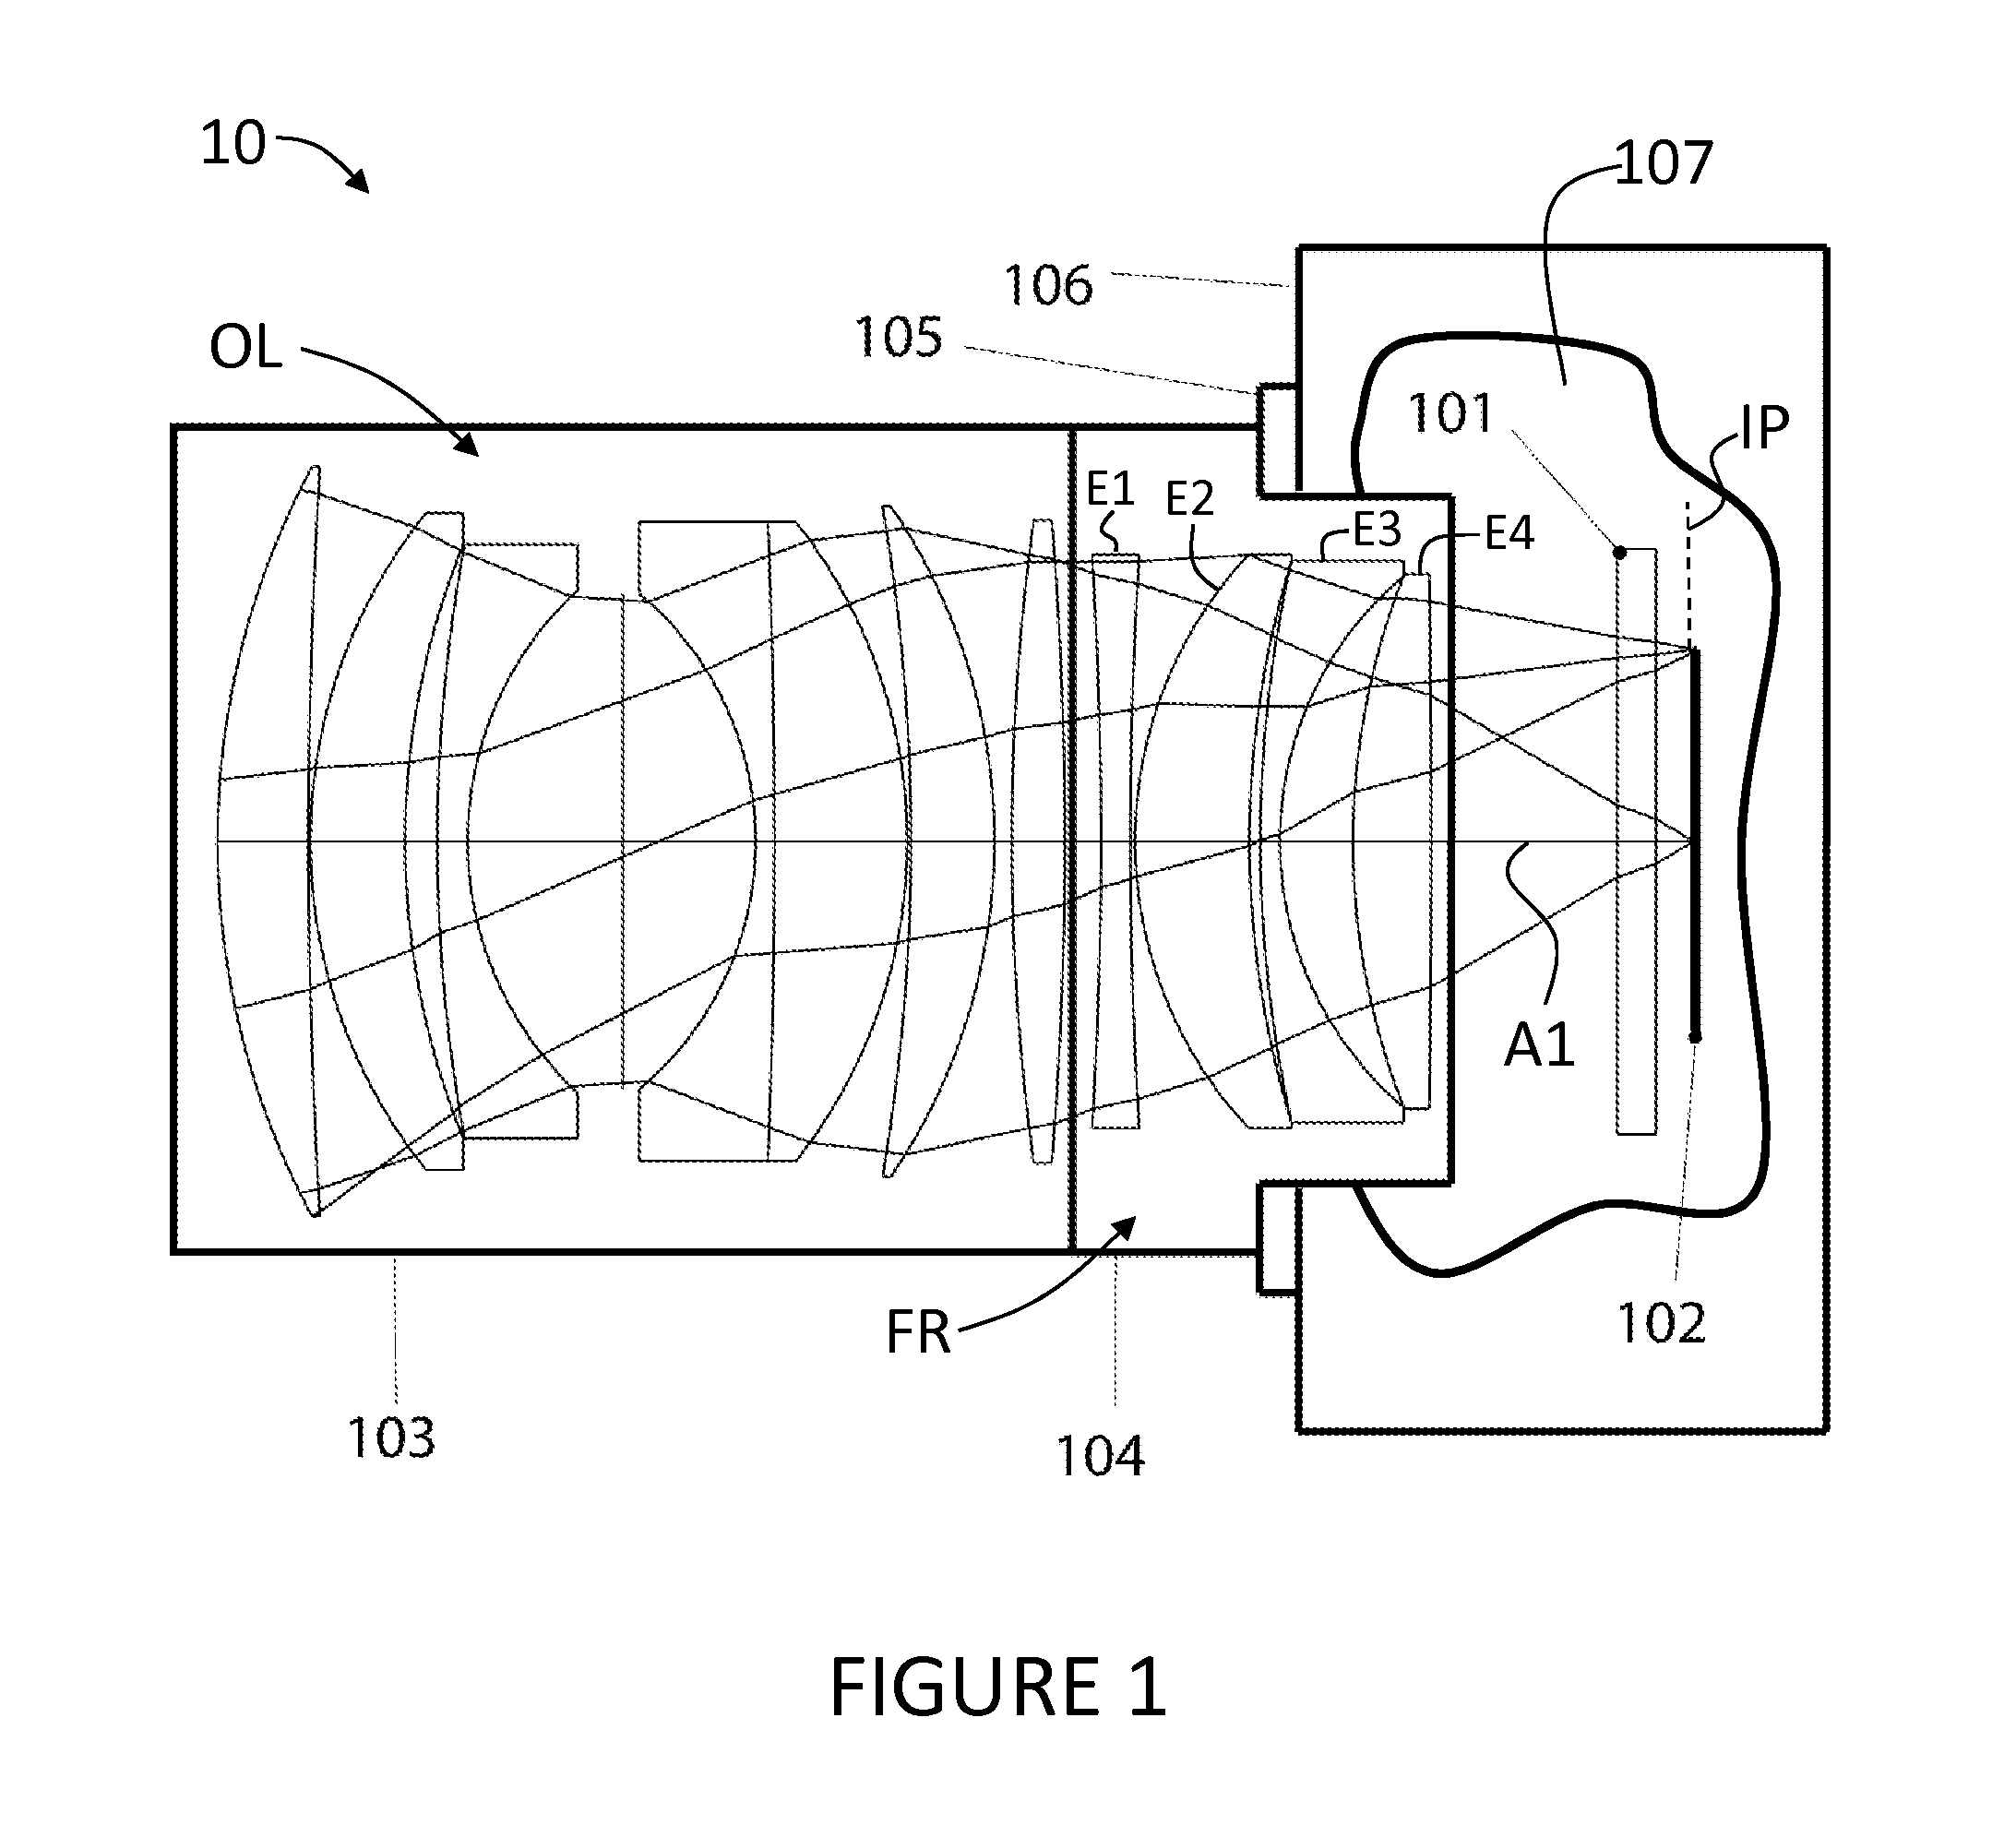 Optical attachment for reducing the focal length of an objective lens